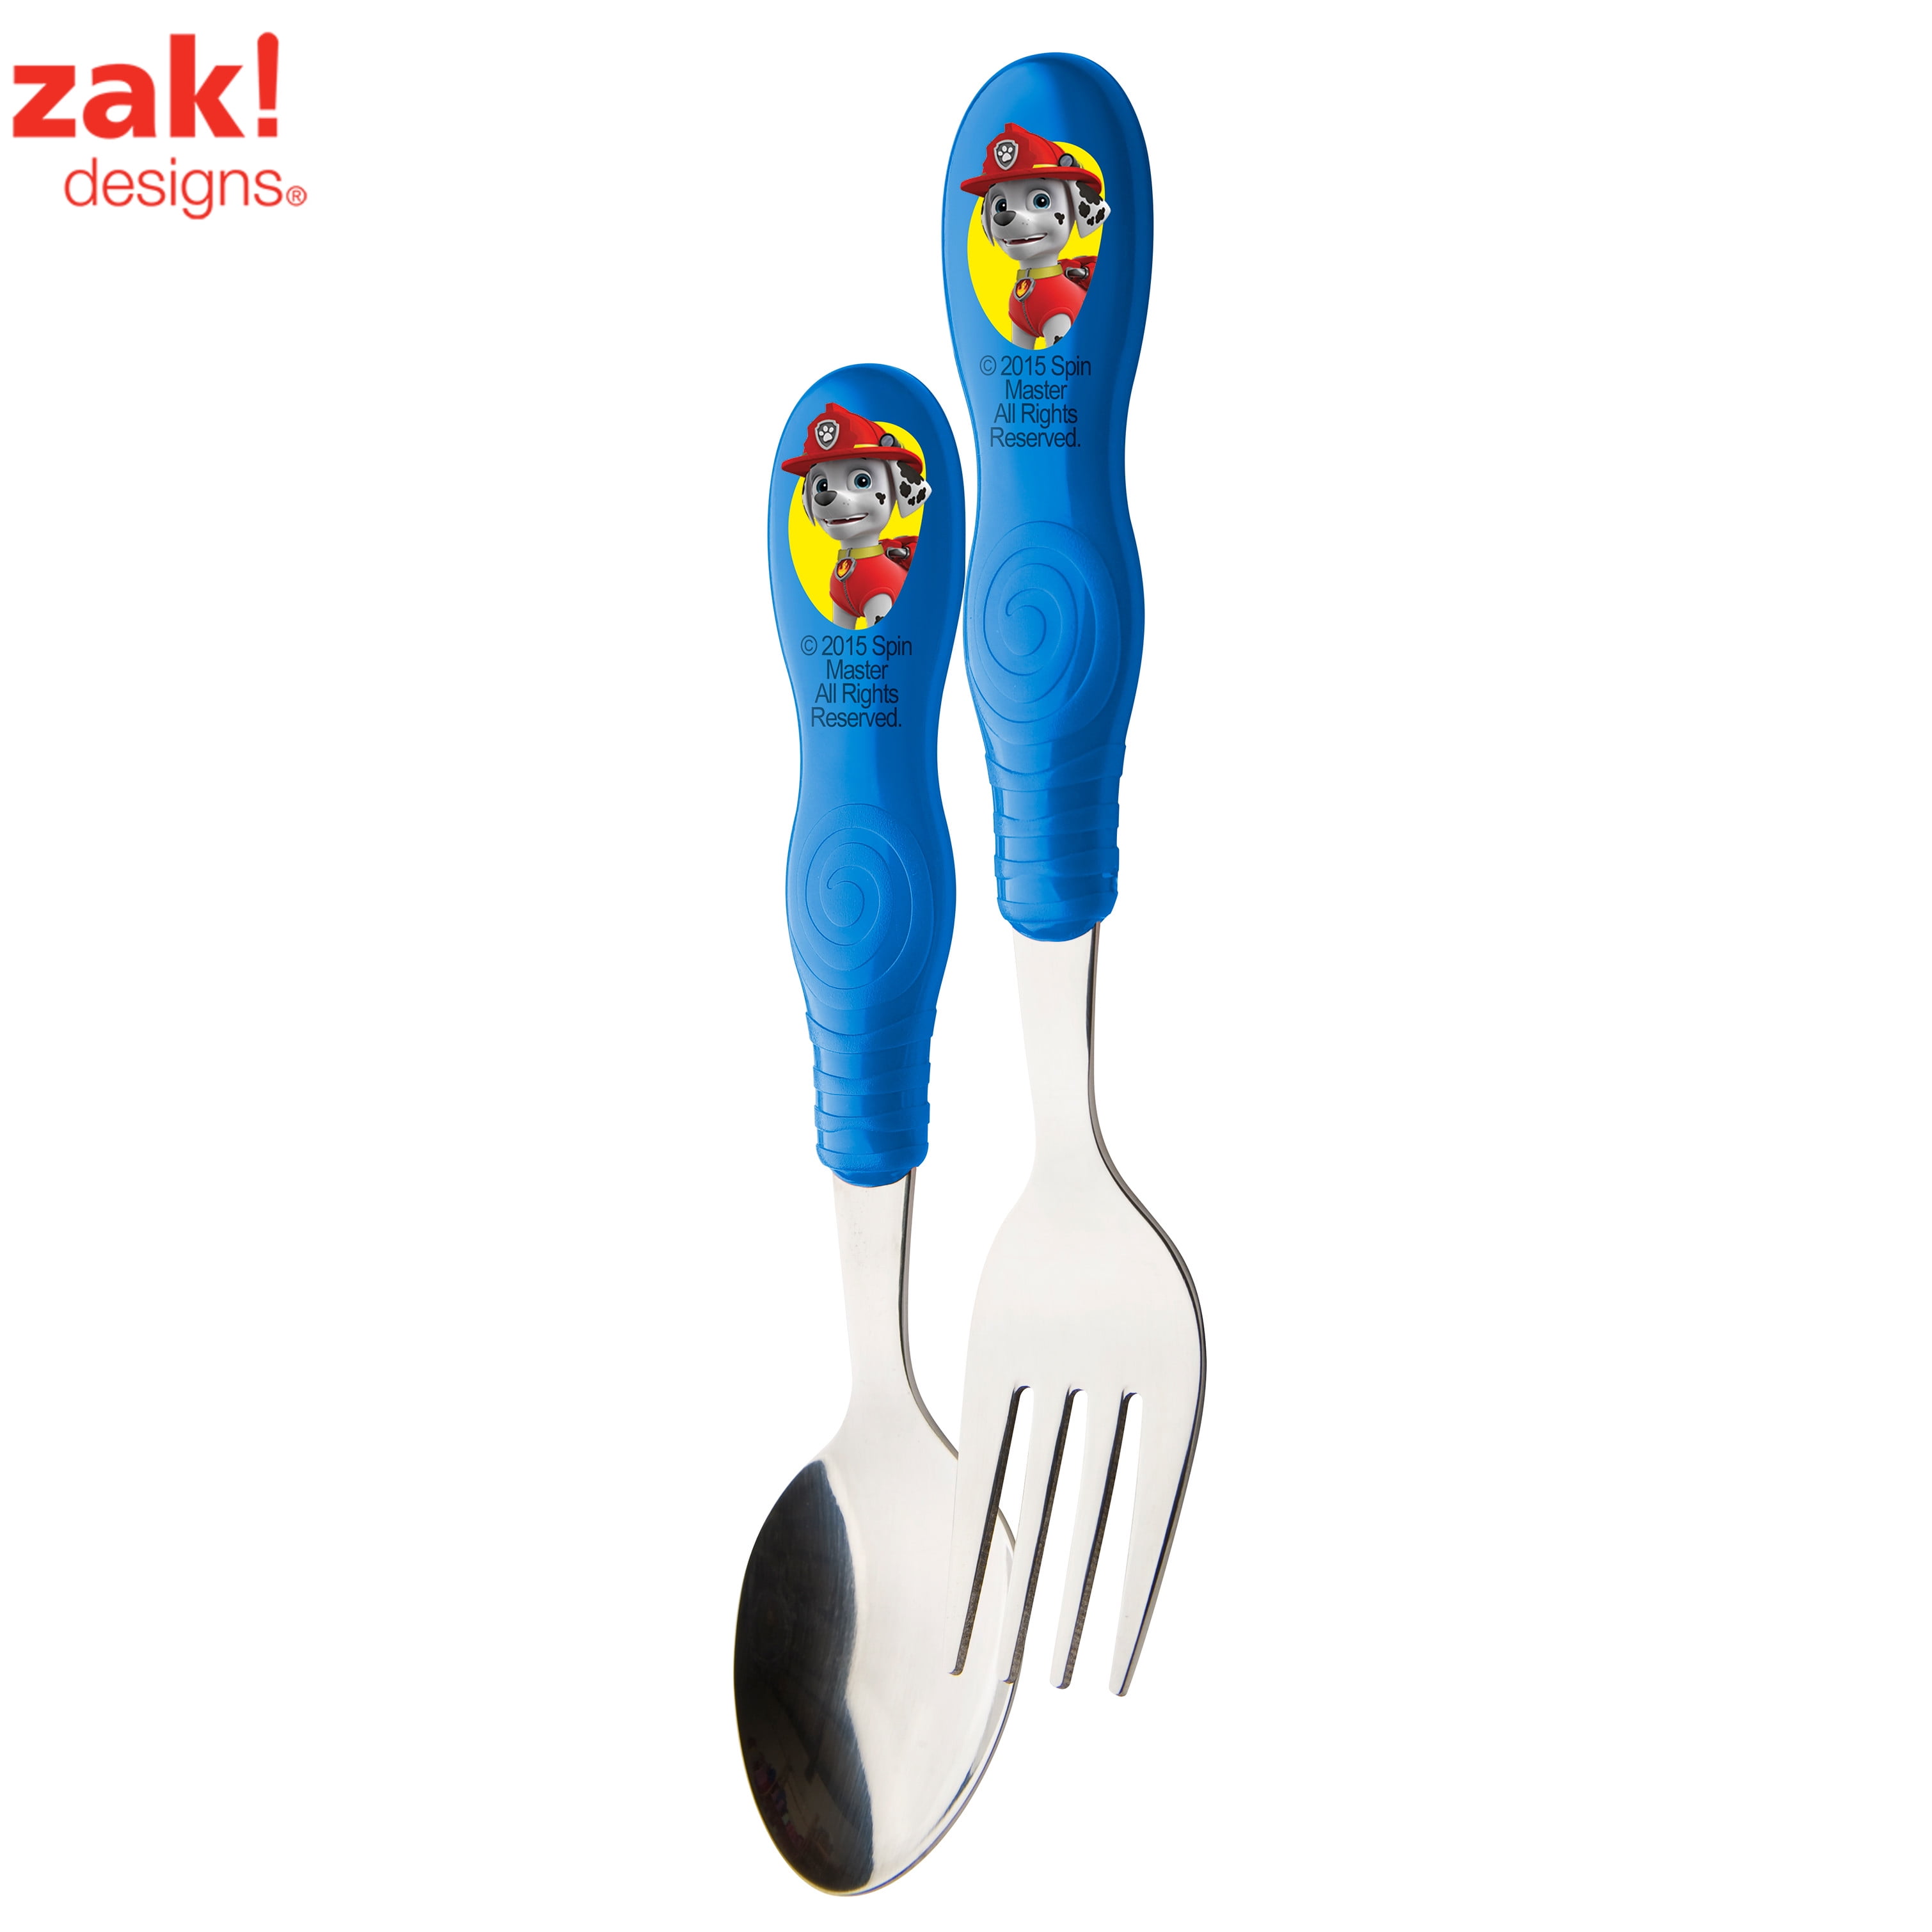 Paw Patrol 3 Piece Cutlery Set – Metal, Reusable Children's Knife, Fork &  Spoon, Kids-Size, Made from Food-Safe Stainless Steel & ABS Plastic – Chase